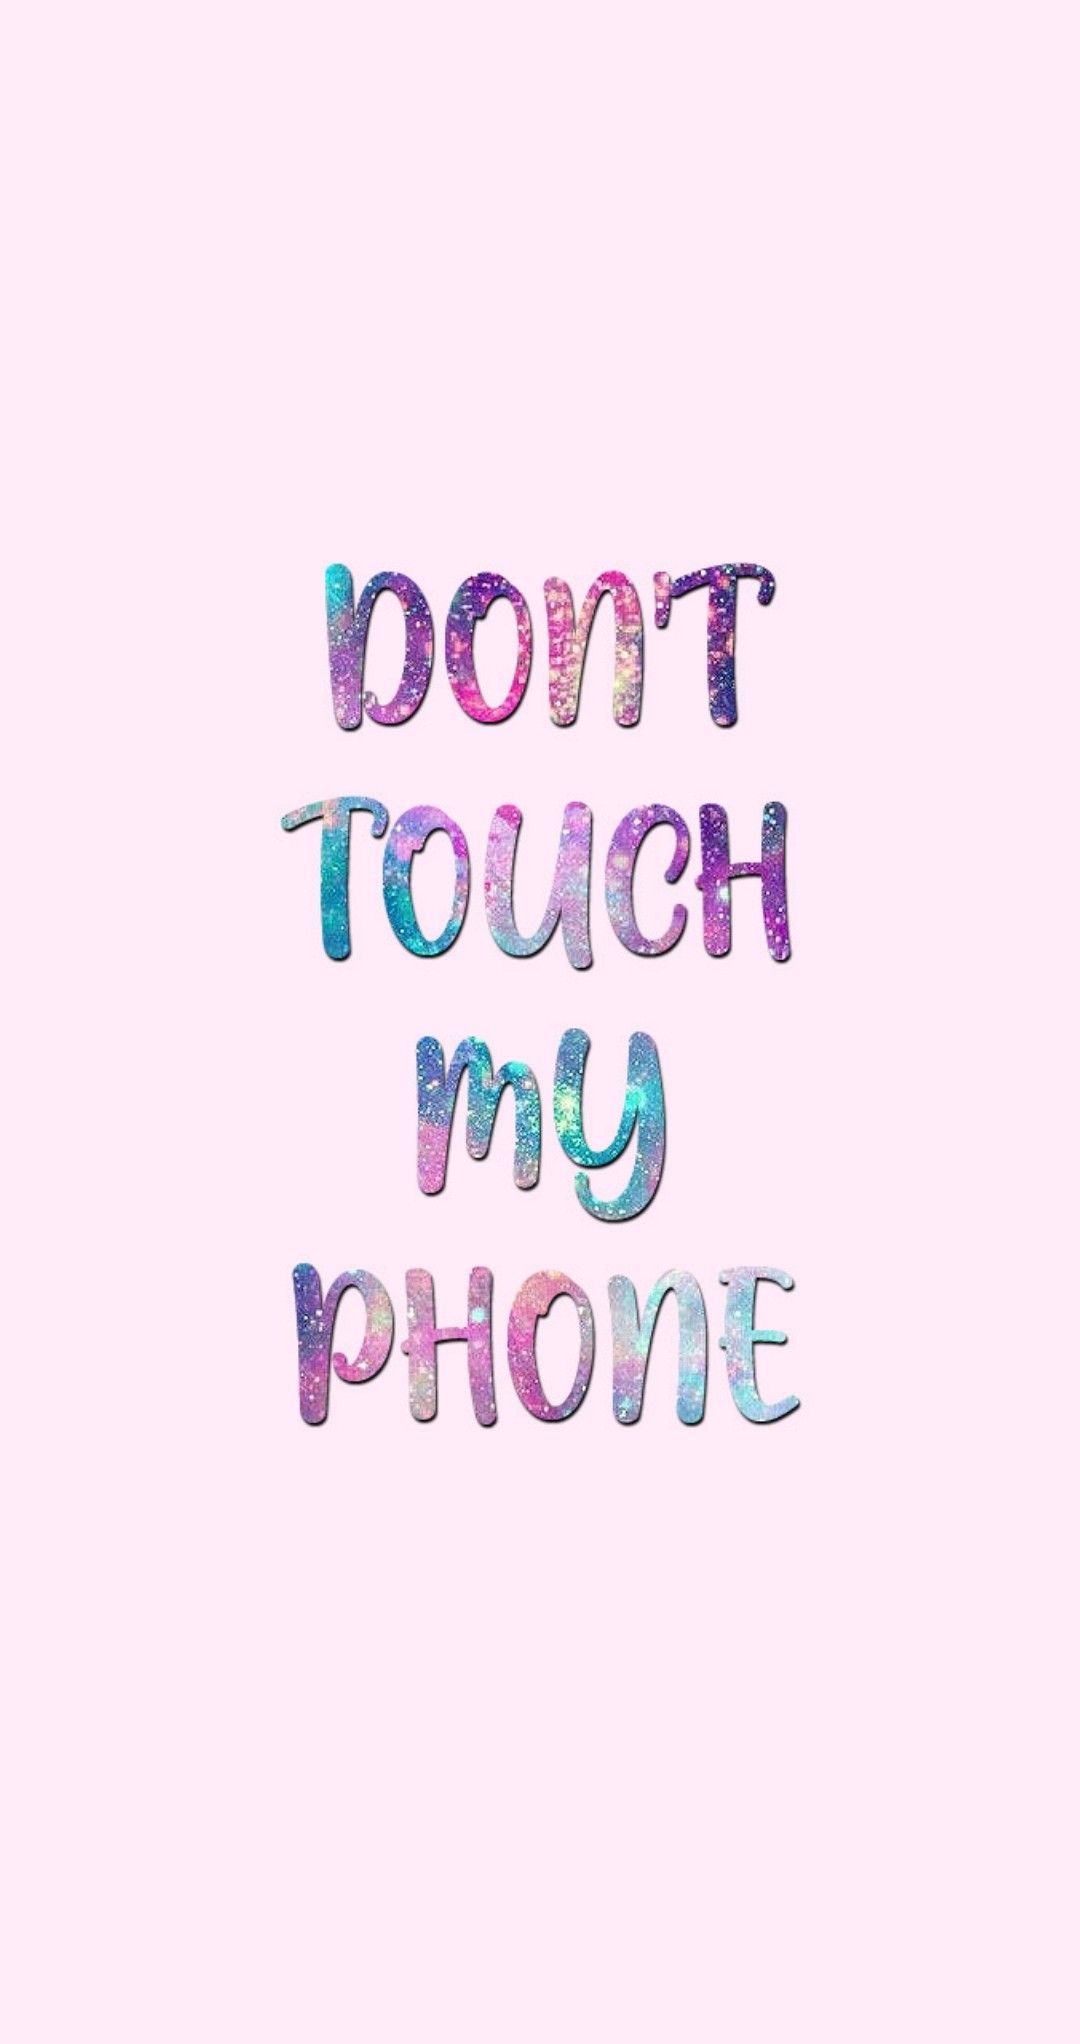 Quotes, Sayings, Words & Motivation Wallpaper 2. Dont touch my phone wallpaper, Don't touch my phone wallpaper funny, Dont touch my phone wallpaper